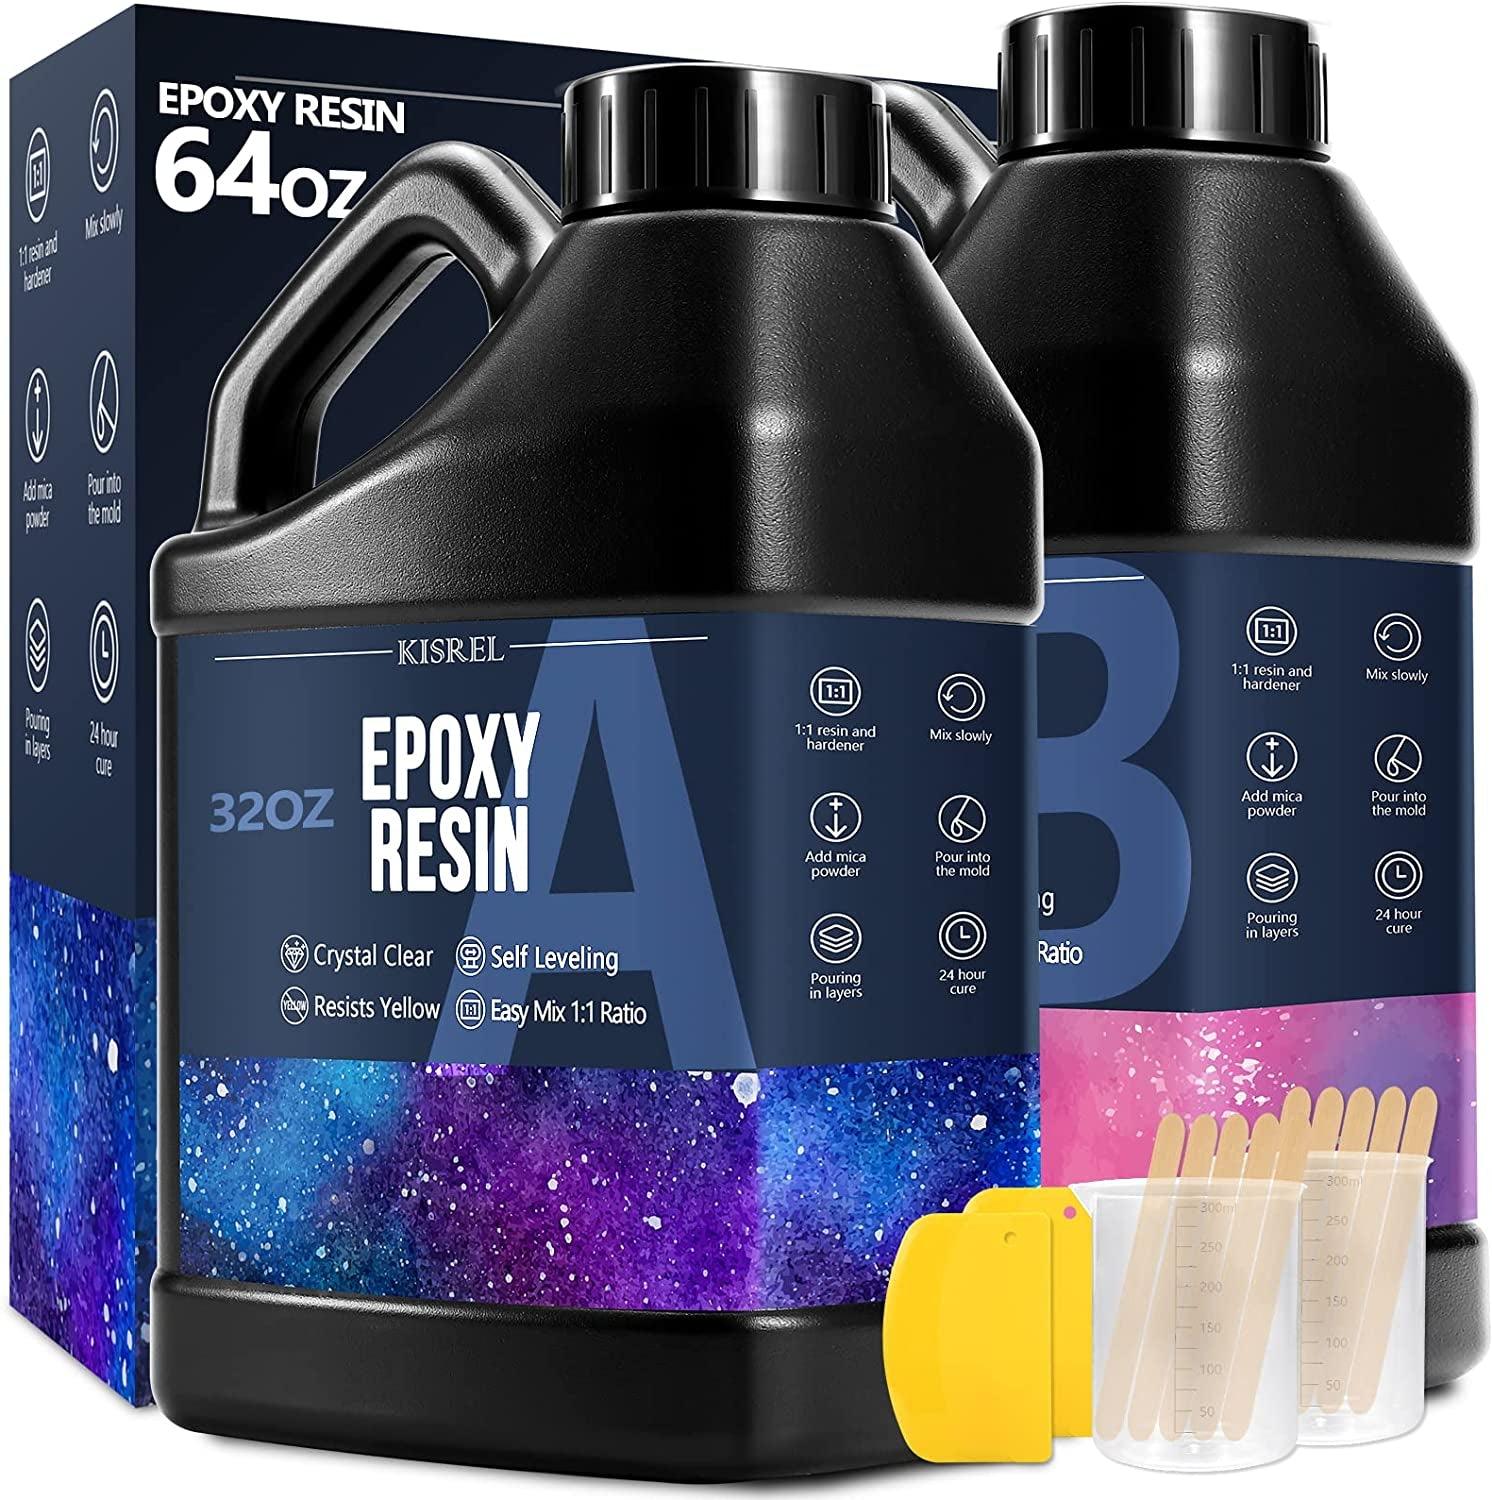 Epoxy Resin 64OZ - Crystal Clear Epoxy Resin Kit - No Yellowing No Bubble Art Resin Casting Resin for Art Crafts, Jewelry Making, Wood & Resin Molds(32Oz X 2) - WoodArtSupply